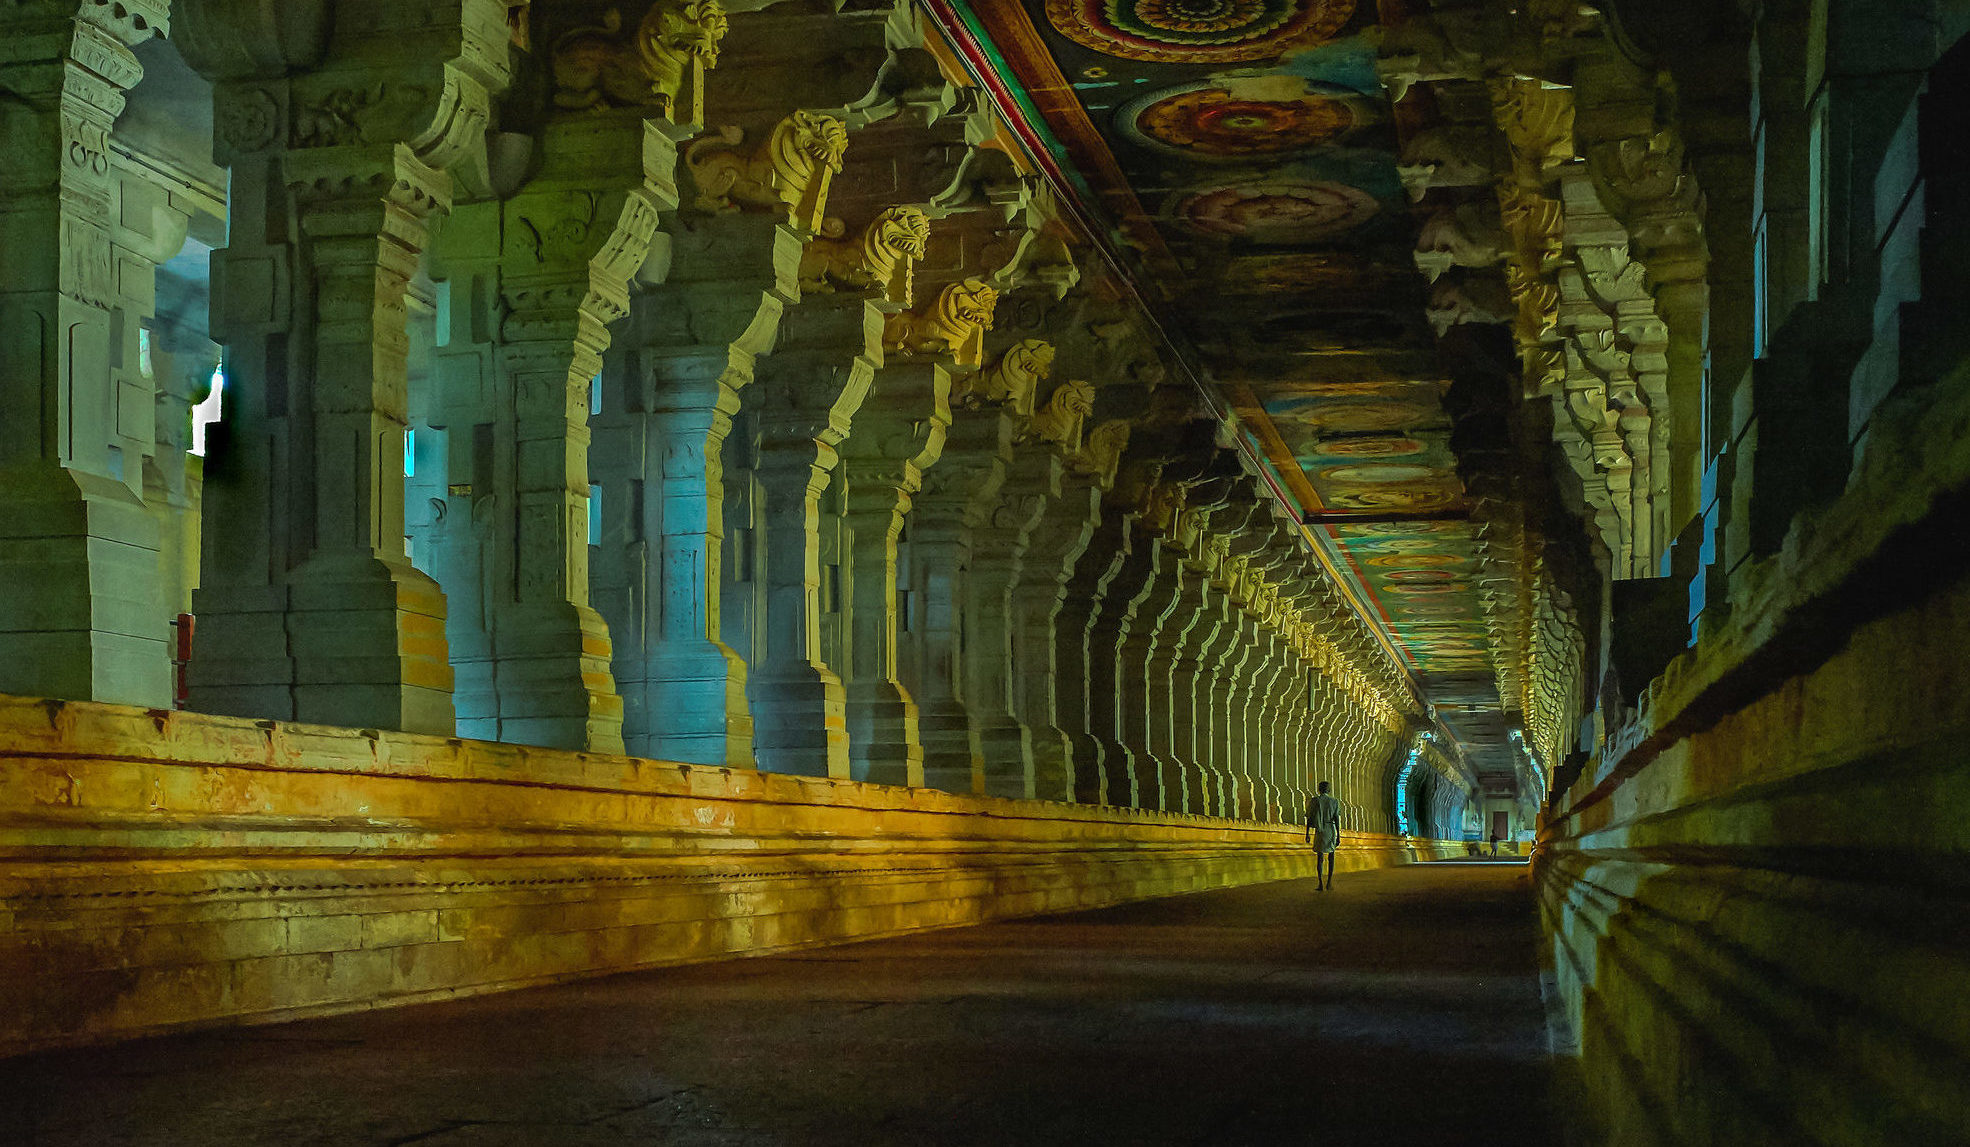 Experience extraordinary Indian architecture like these colourfully painted pillars in Rameshwaram when you take a tailor-made holiday with Alfred&.